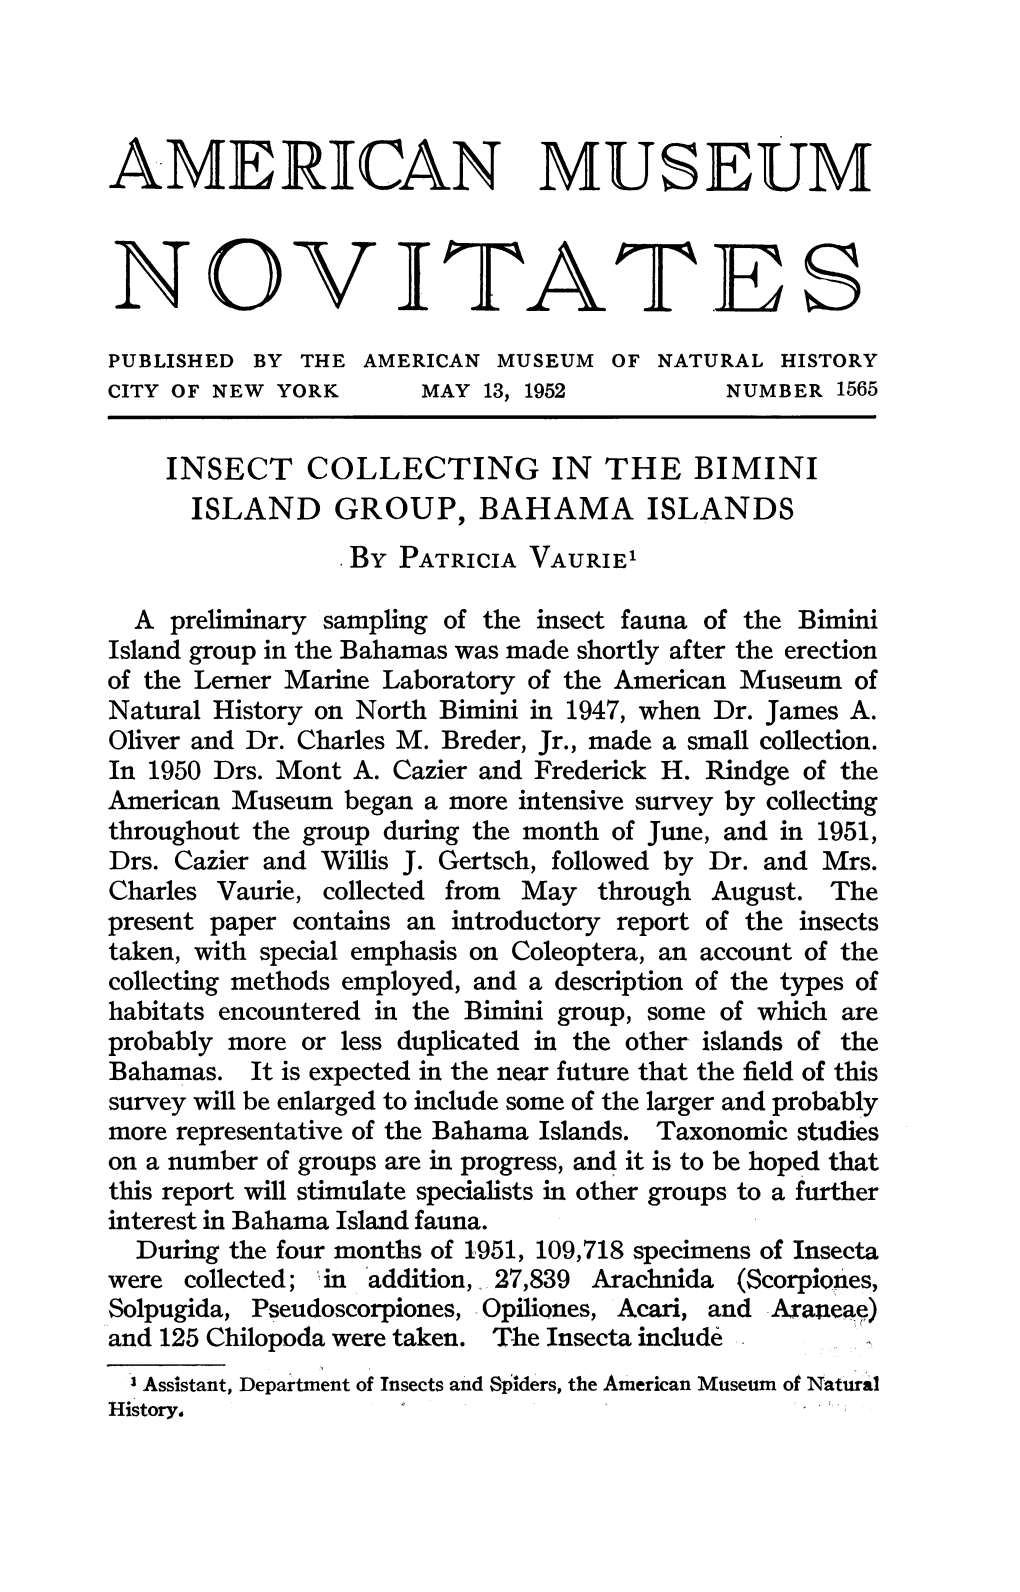 Novitates Published by the American Museum of Natural History City of New York May 13, 1952 Number 1565